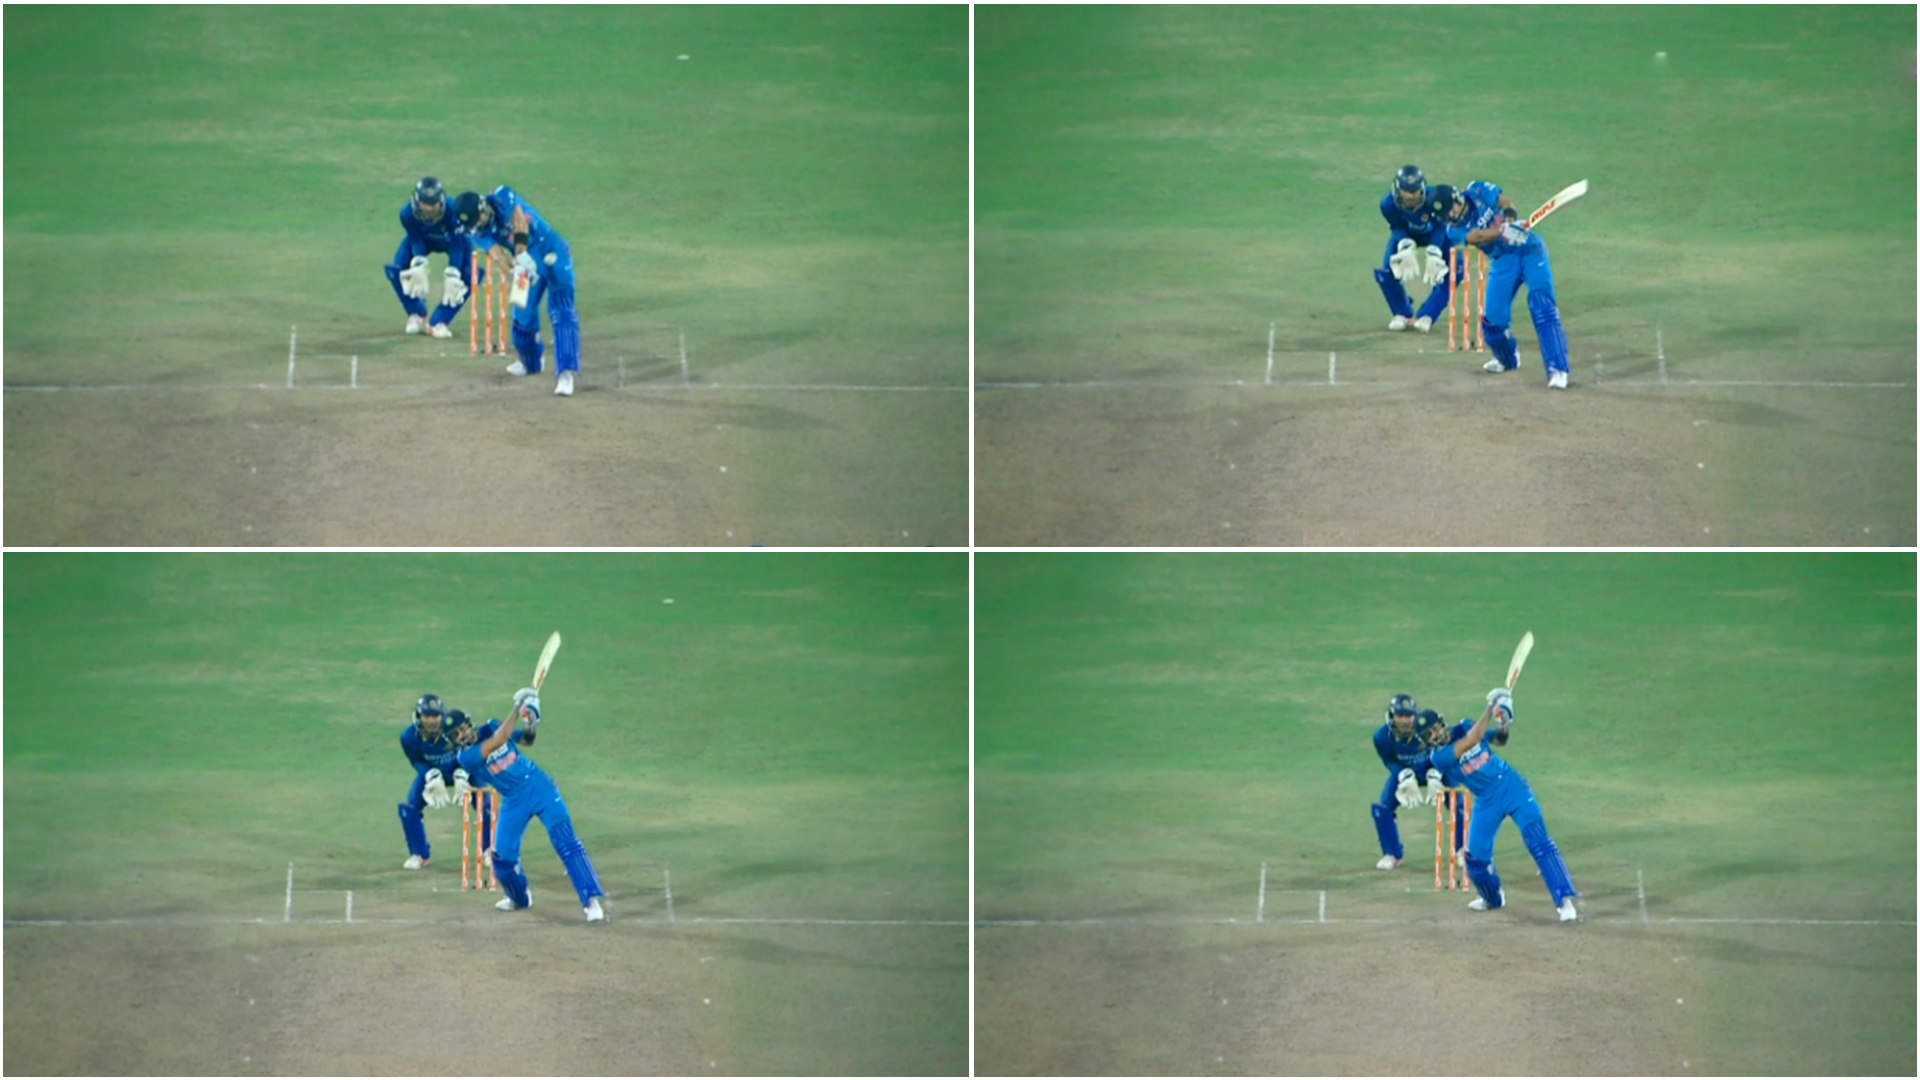 Virat Kohli playing a helicopter shot in the 5th ODI. Image Credit: Star Sports screenshot